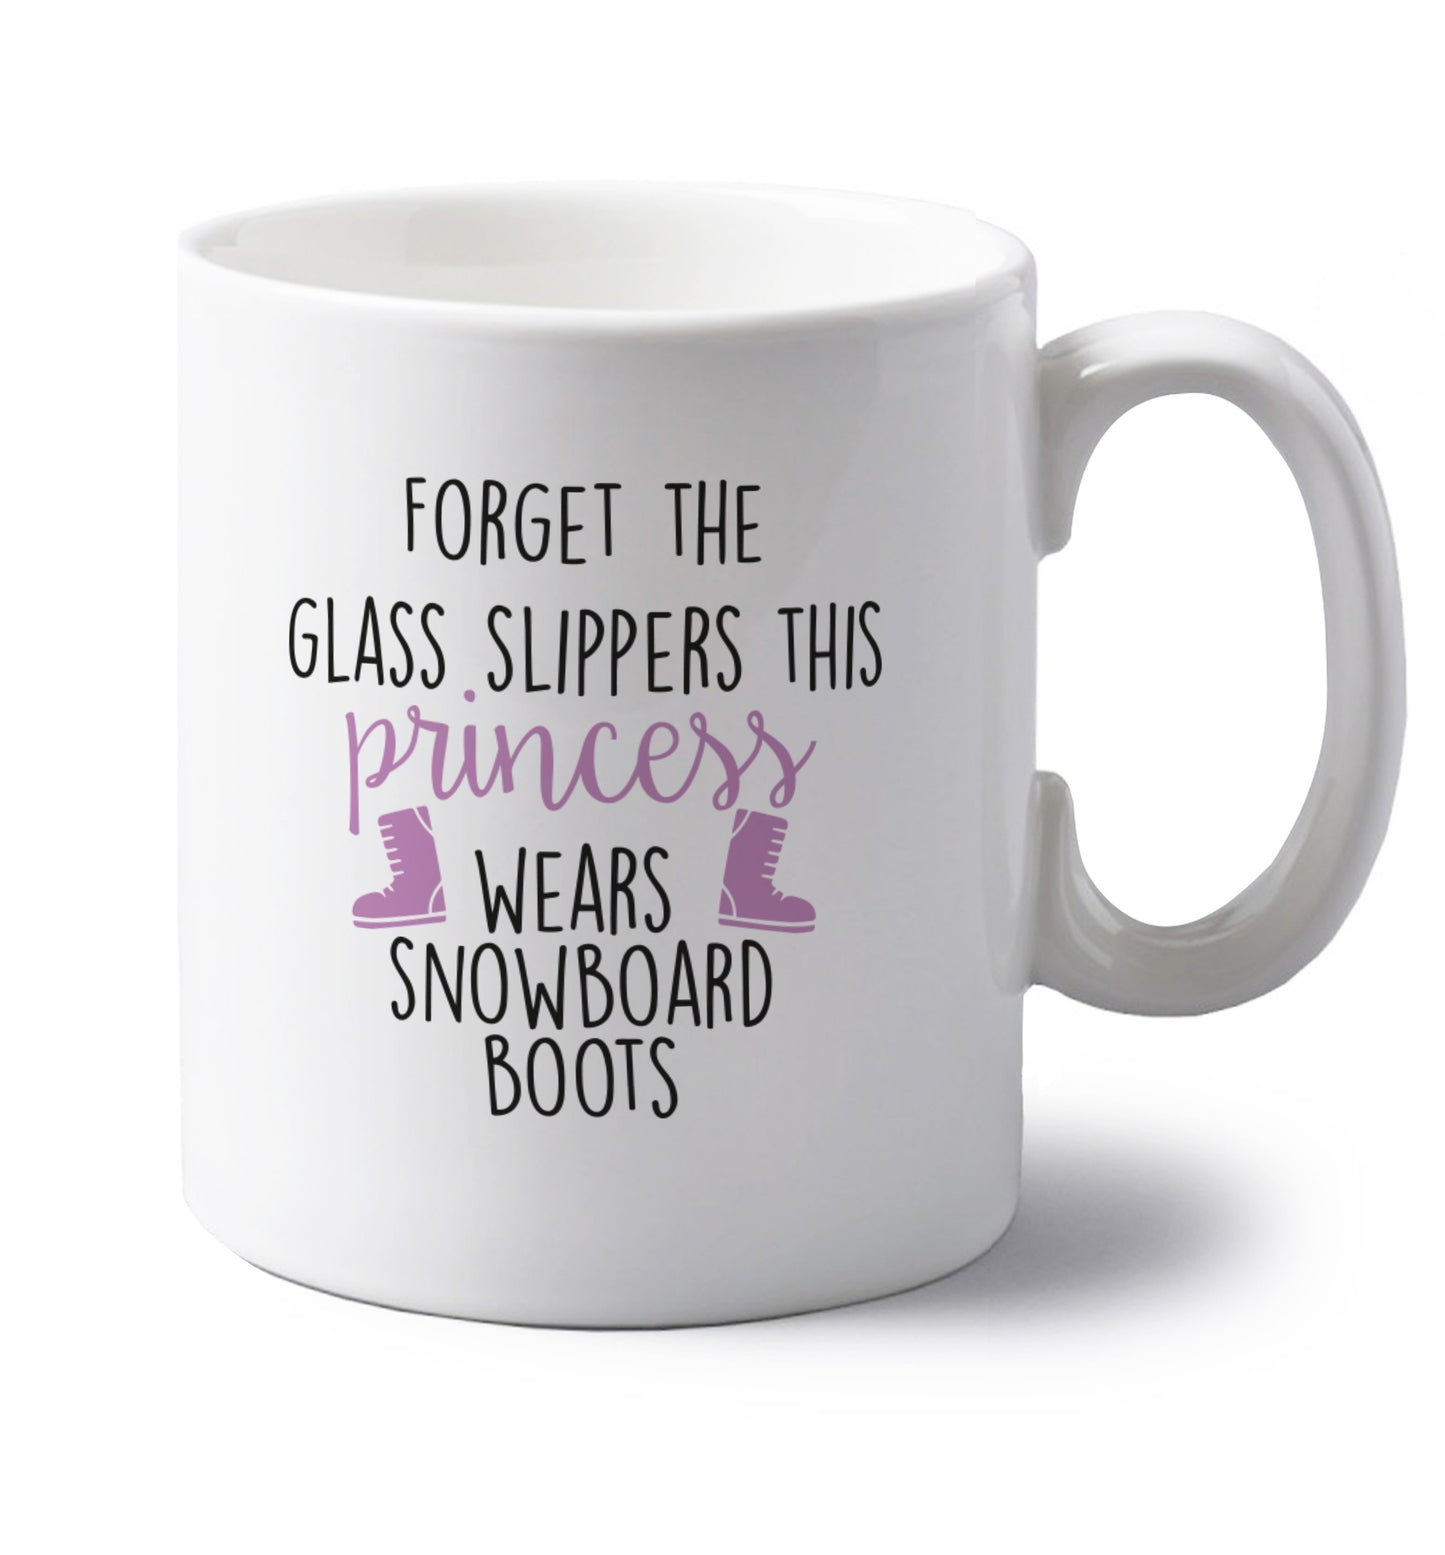 Forget the glass slippers this princess wears snowboard boots left handed white ceramic mug 